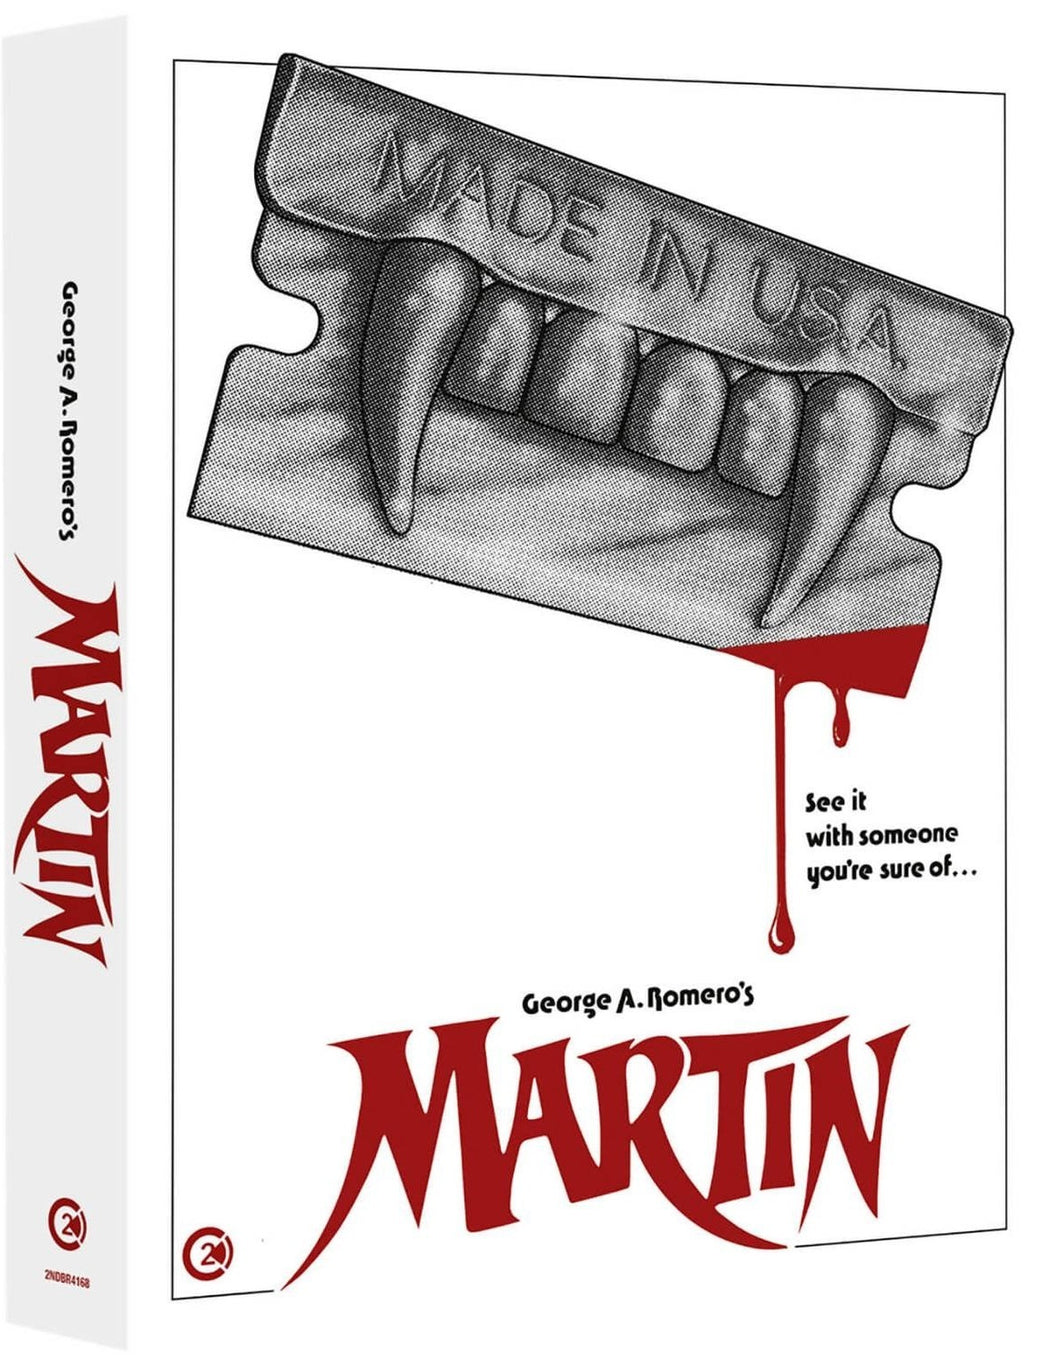 Martin 4K Limited Edition (1977) de George A. Romero - front cover